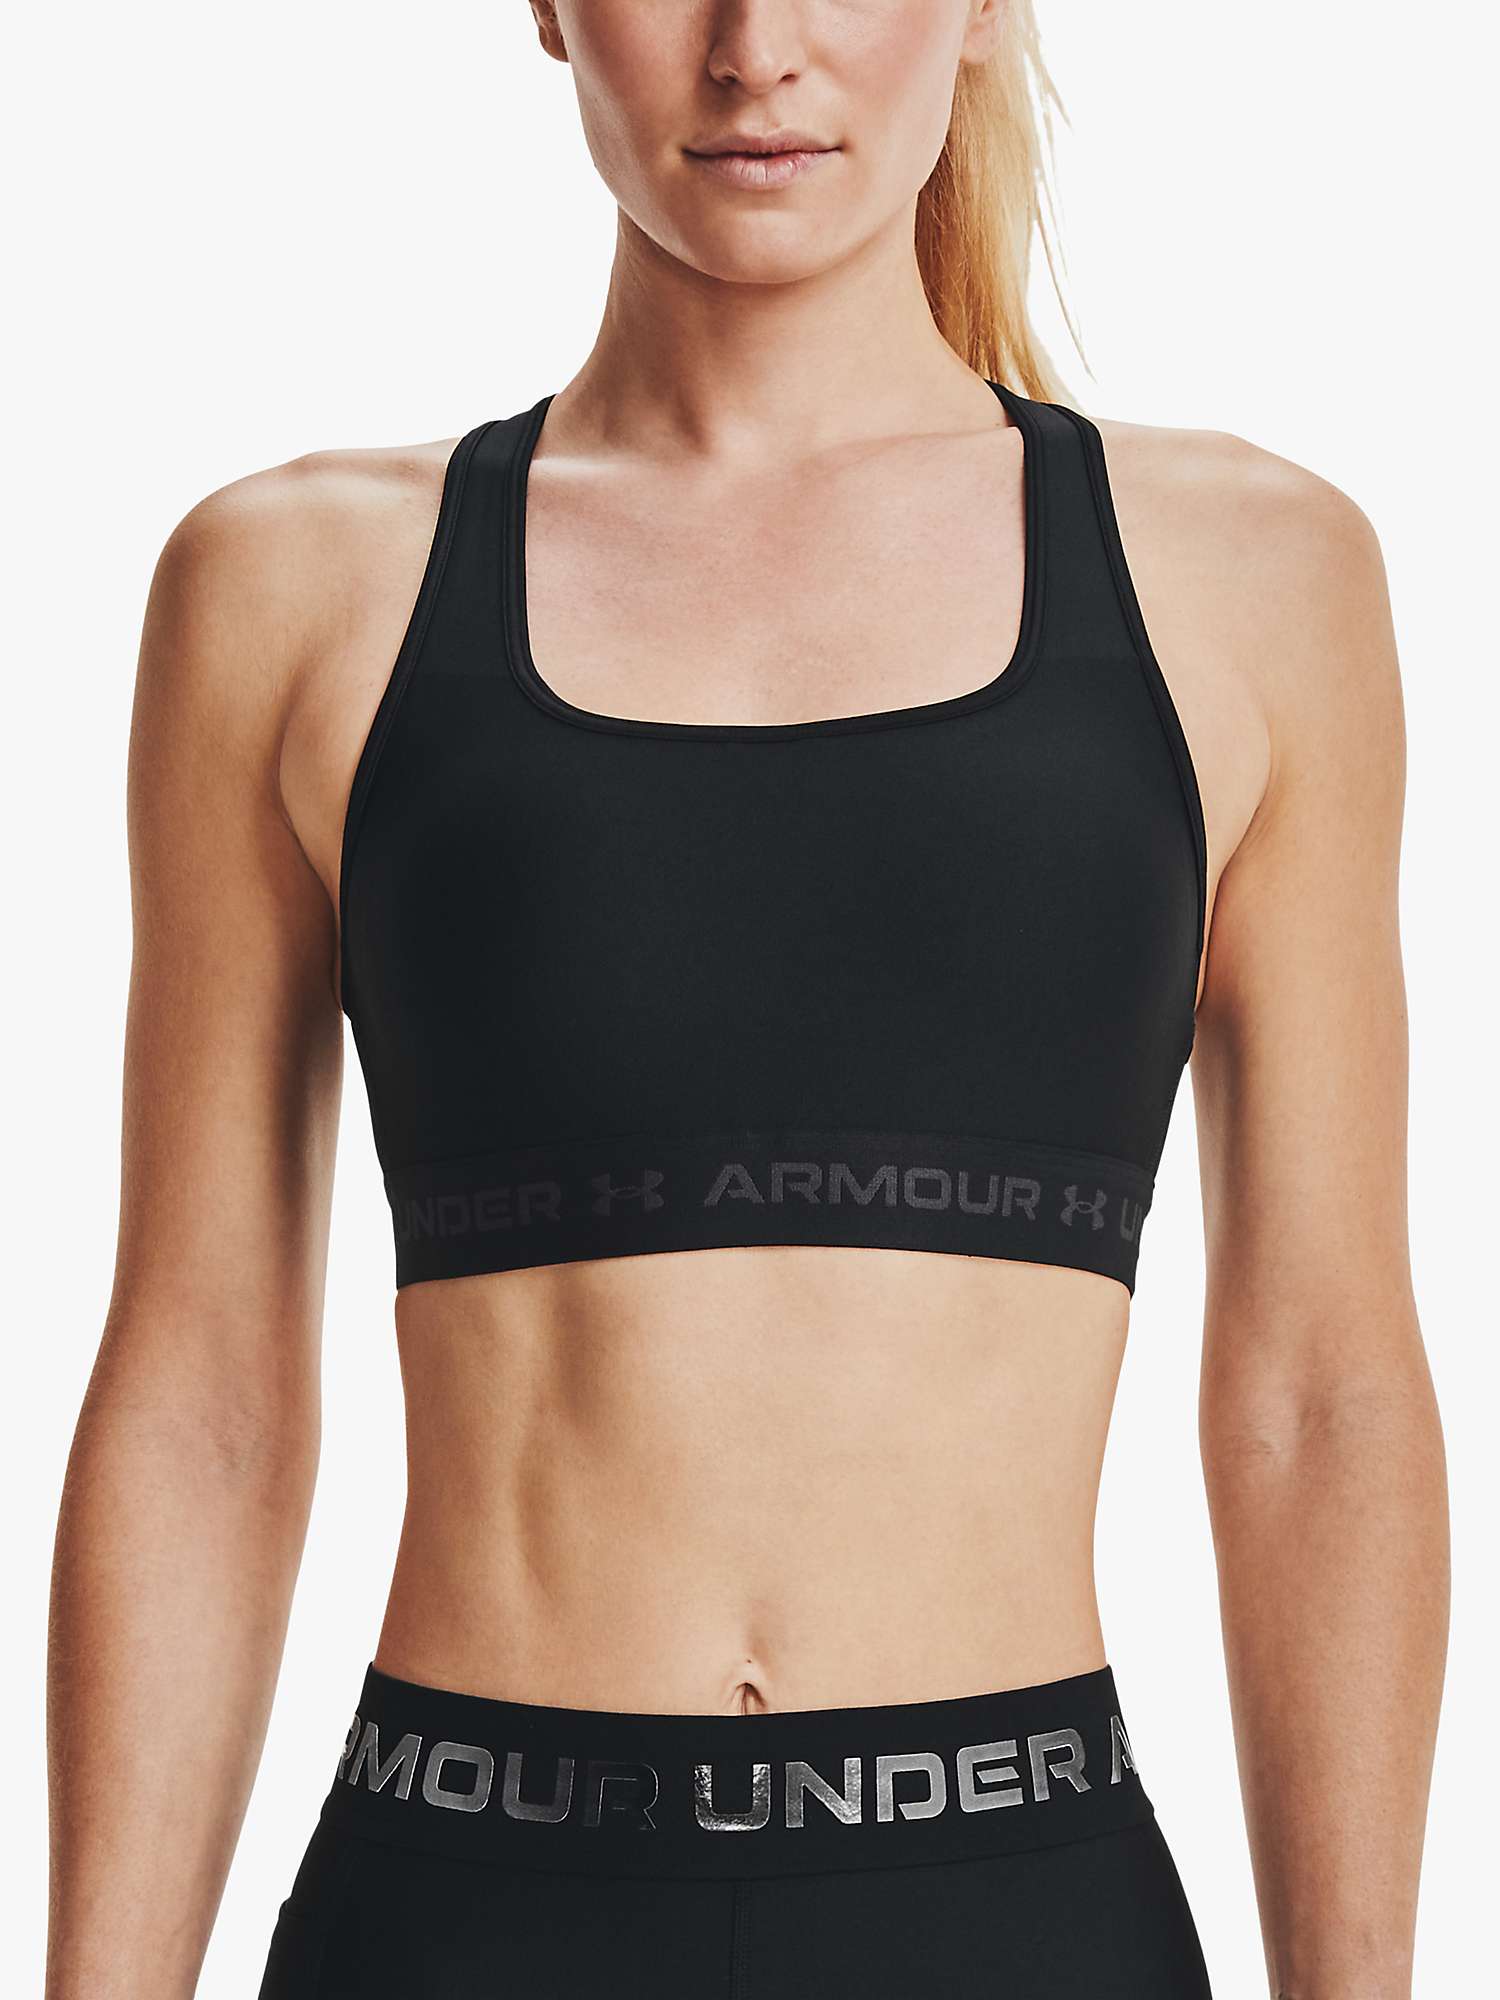 Under Armour Mid Armour Crossback Sports Bra, Black at John Lewis